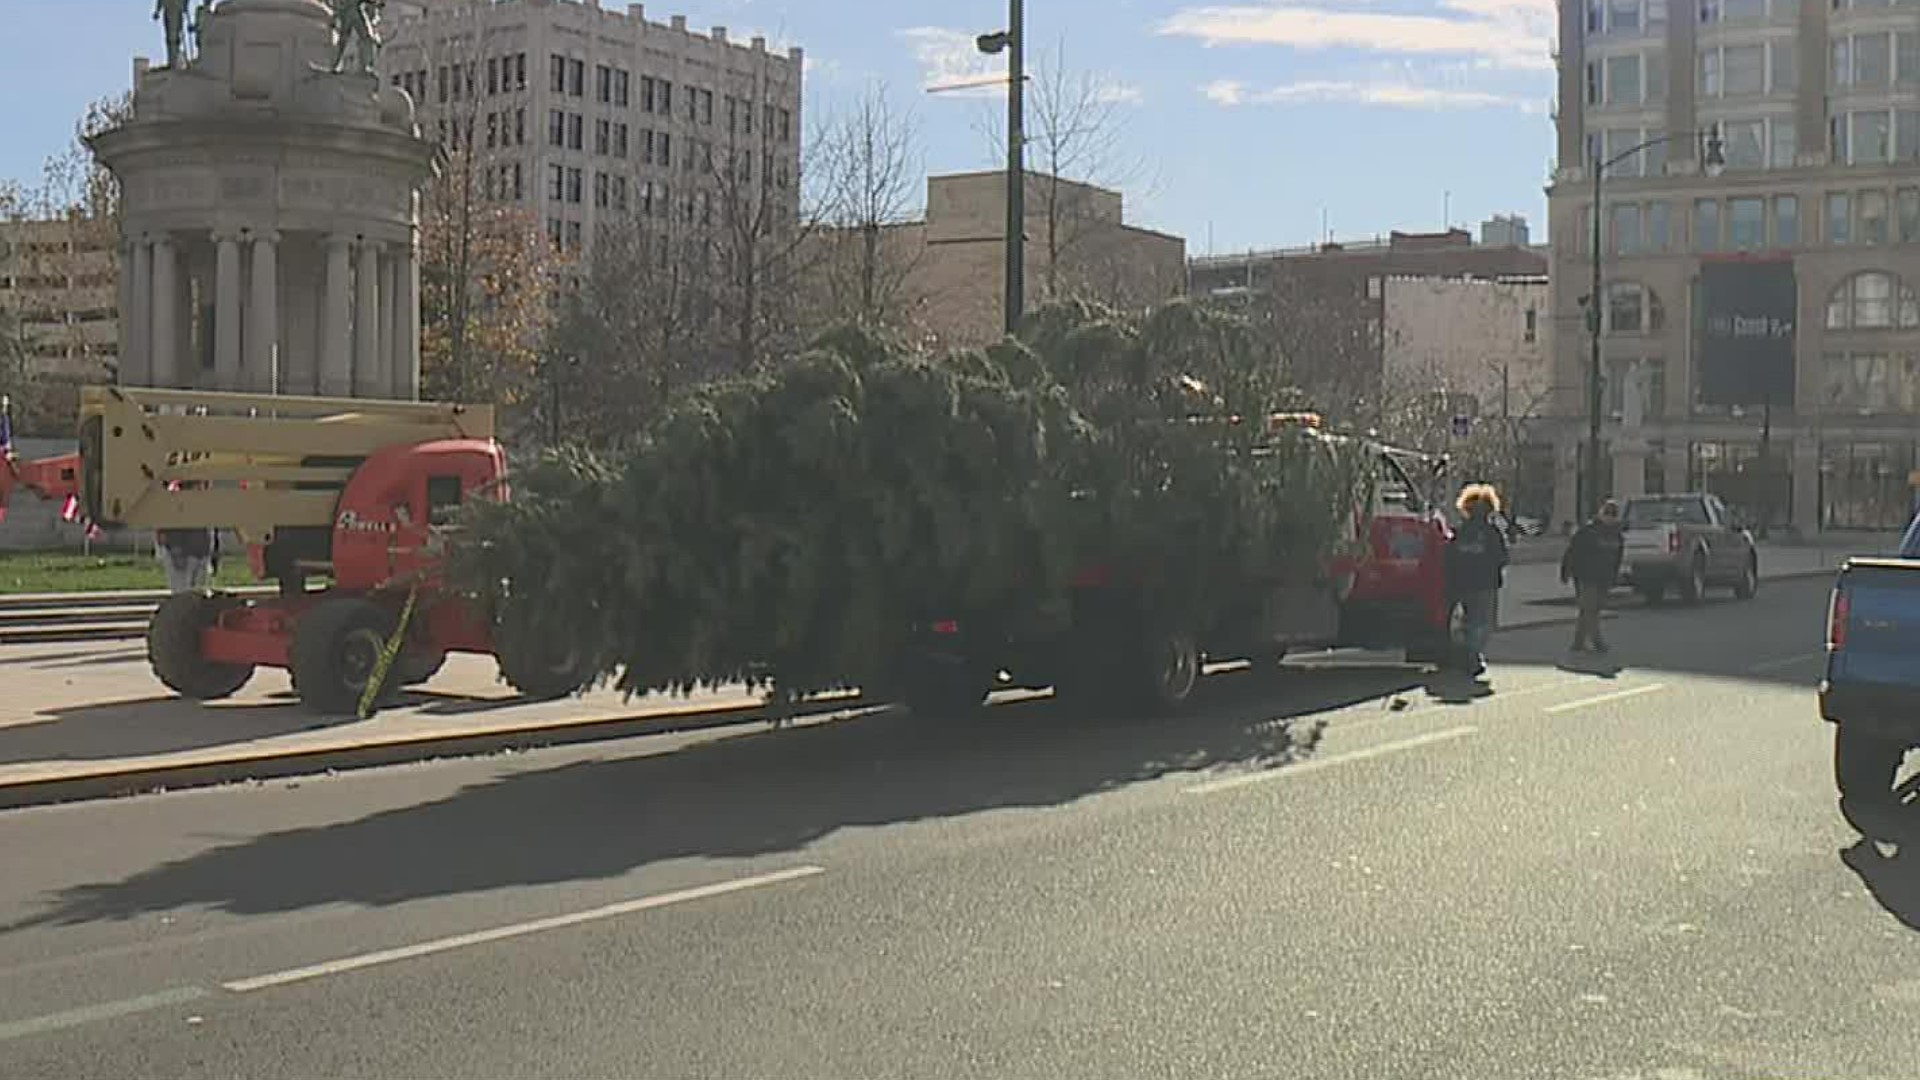 A holiday tradition took place Monday in Scranton. The Lackawanna County tree arrived at Courthouse Square.